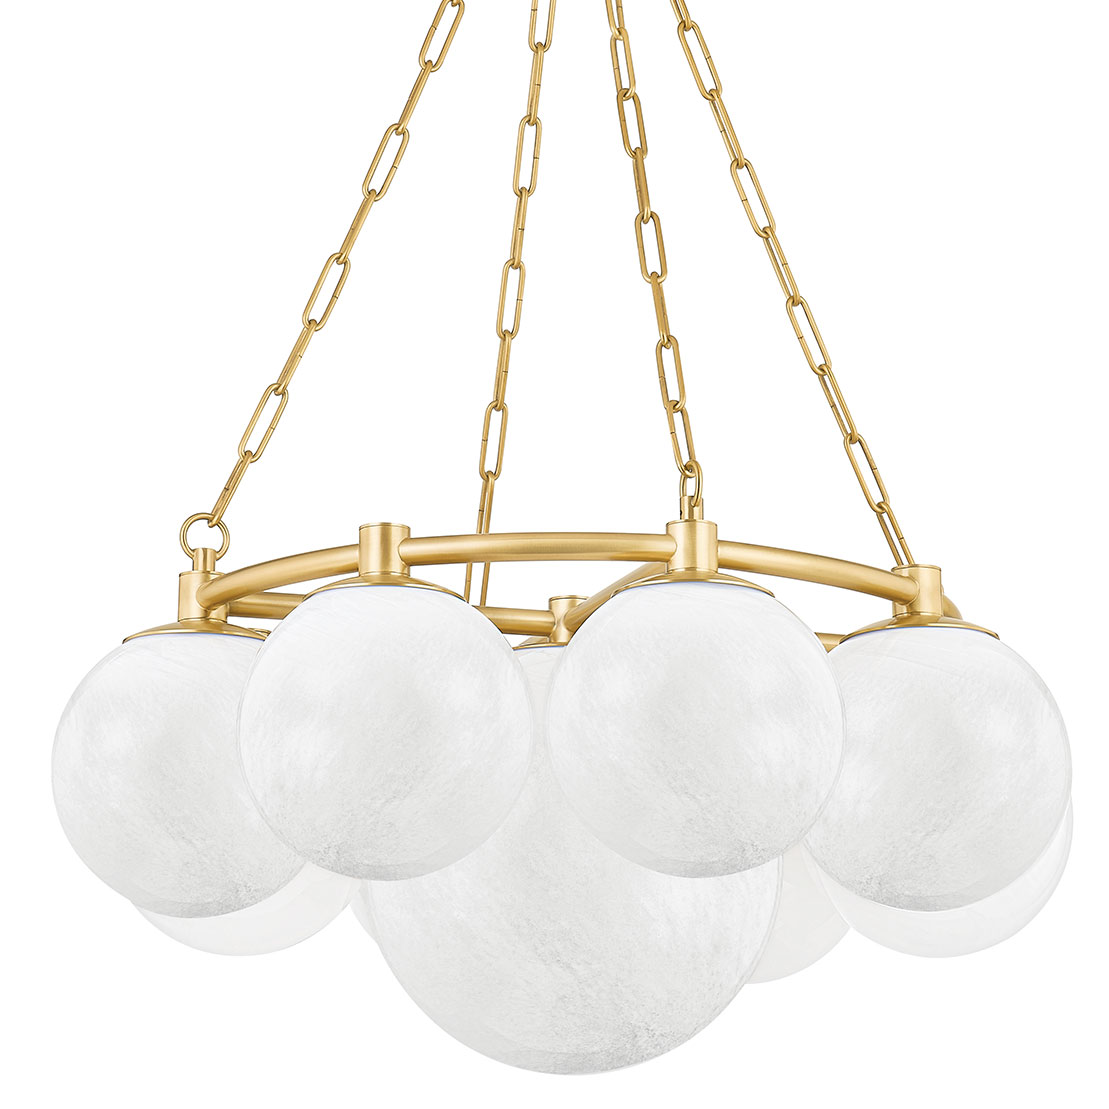 Thornwood Chandelier By Hudson Valley